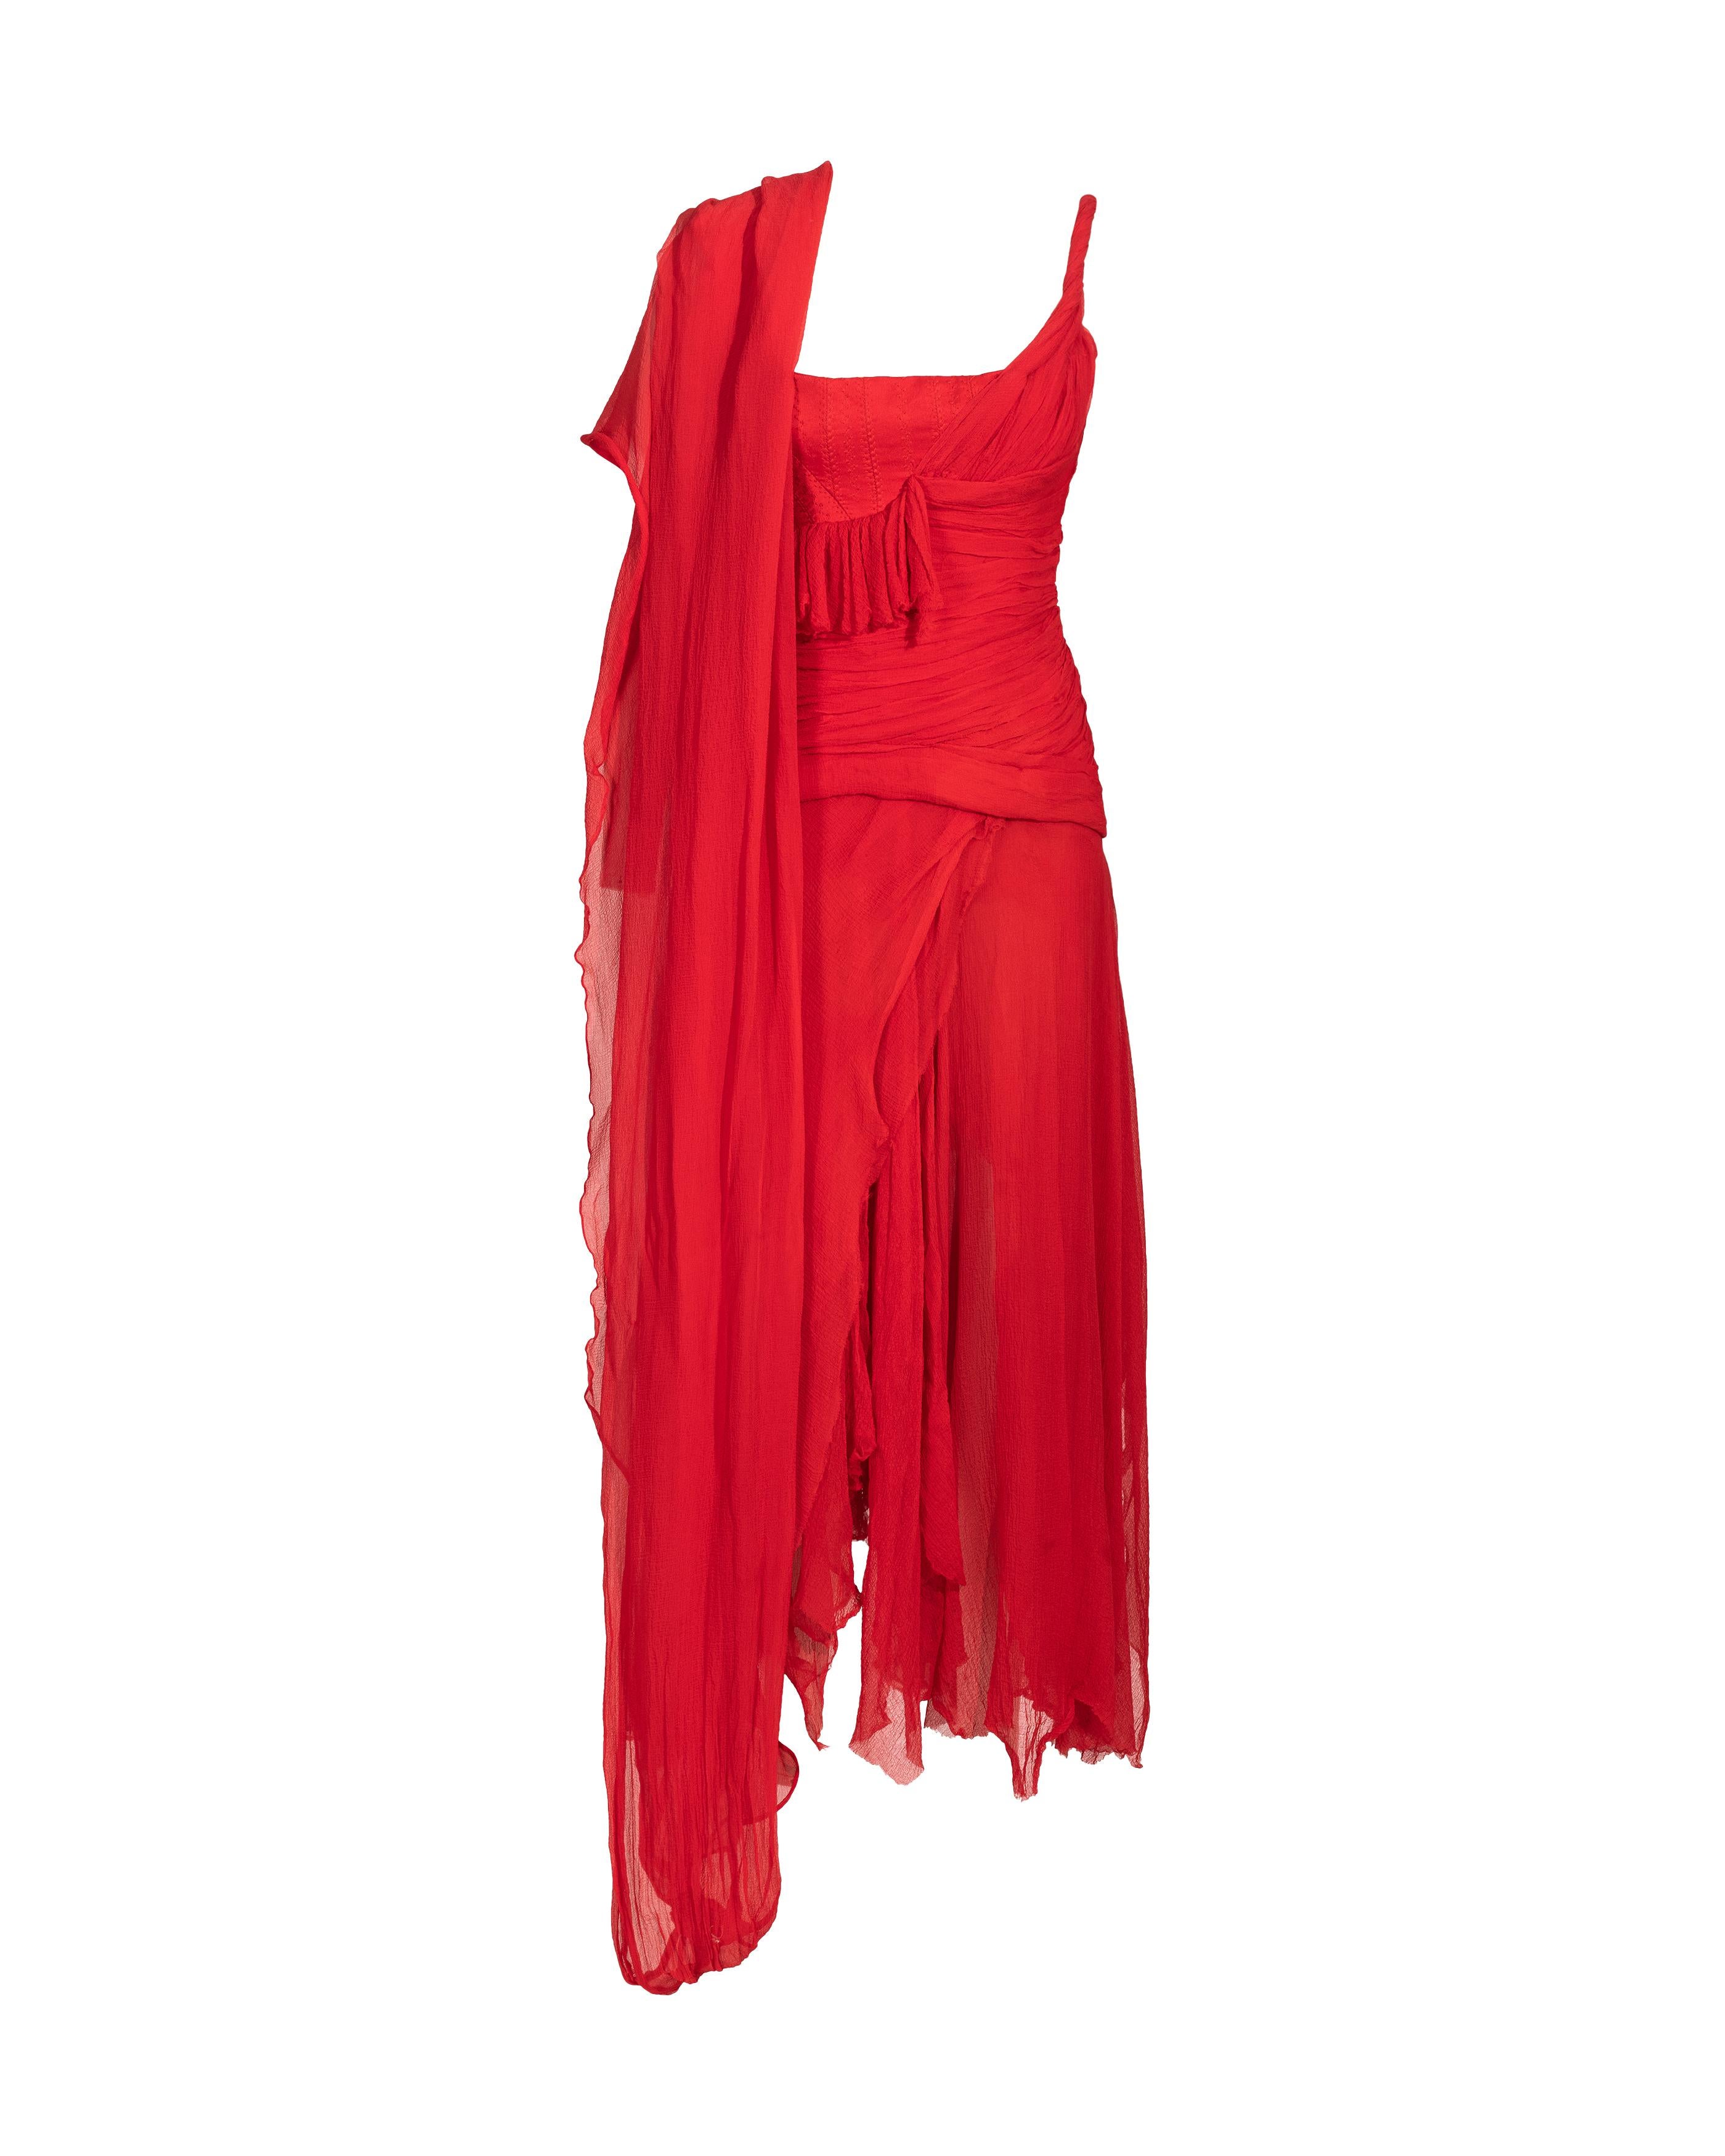 S/S 2003 Alexander McQueen  'Irere' Collection Red Silk Chiffon Gown with Sash In Good Condition For Sale In North Hollywood, CA